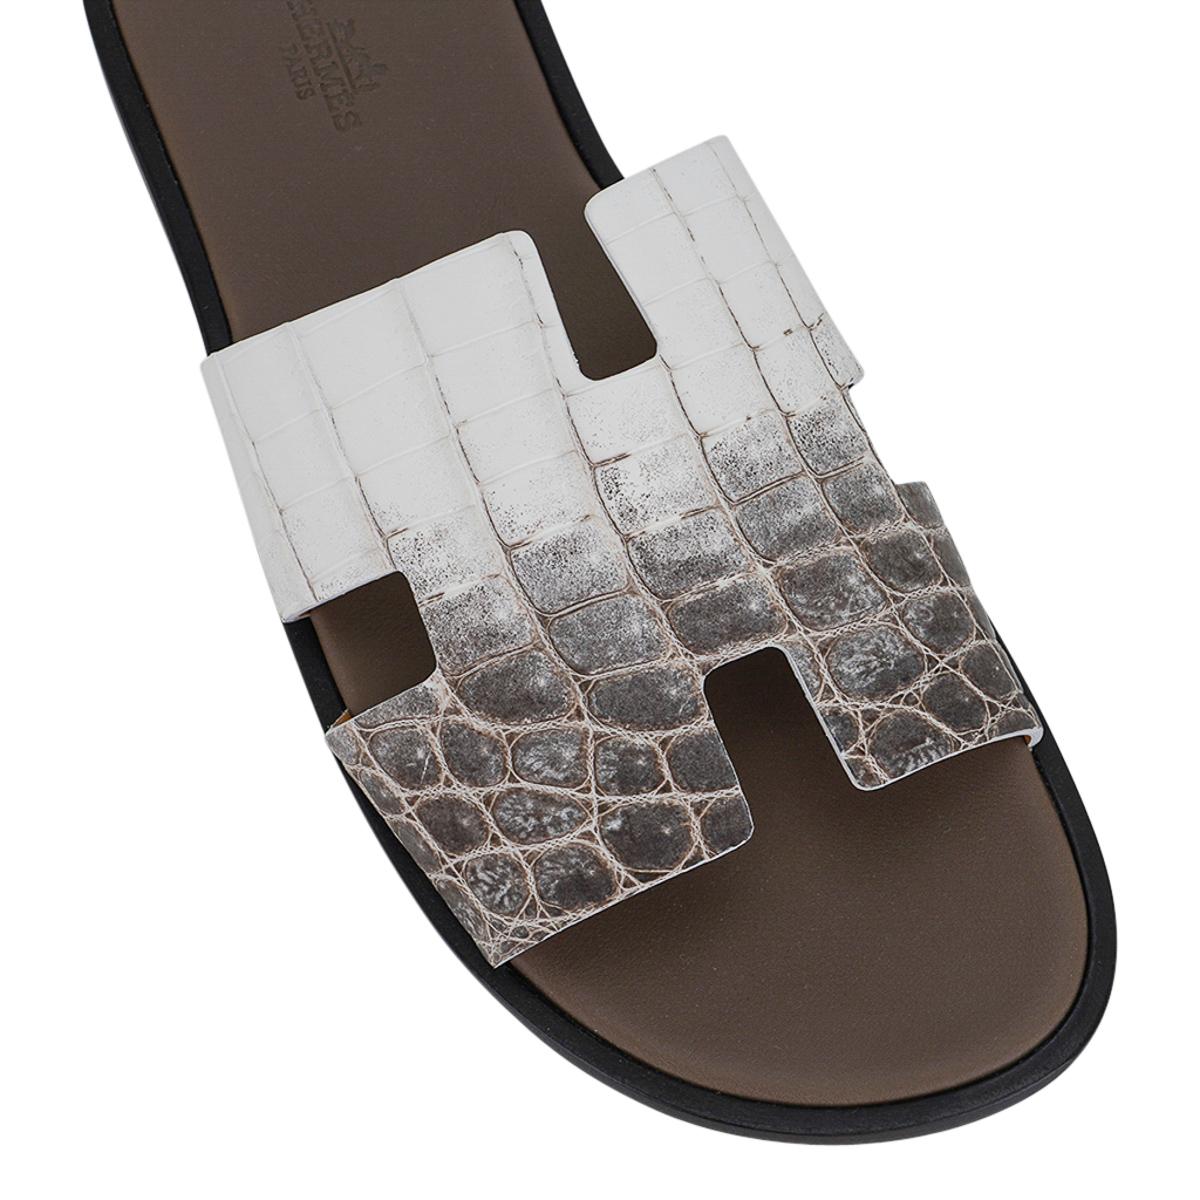 Mightychic offers a pair of Hermes Men's Izmir sandal featured in Himalaya Blanc Crocodile.
The iconic H cutout over the top of the foot in Swift leather.
Sophisticated in a silhouette that works for every wardrobe.
Insole is Taupe leather.
Wood